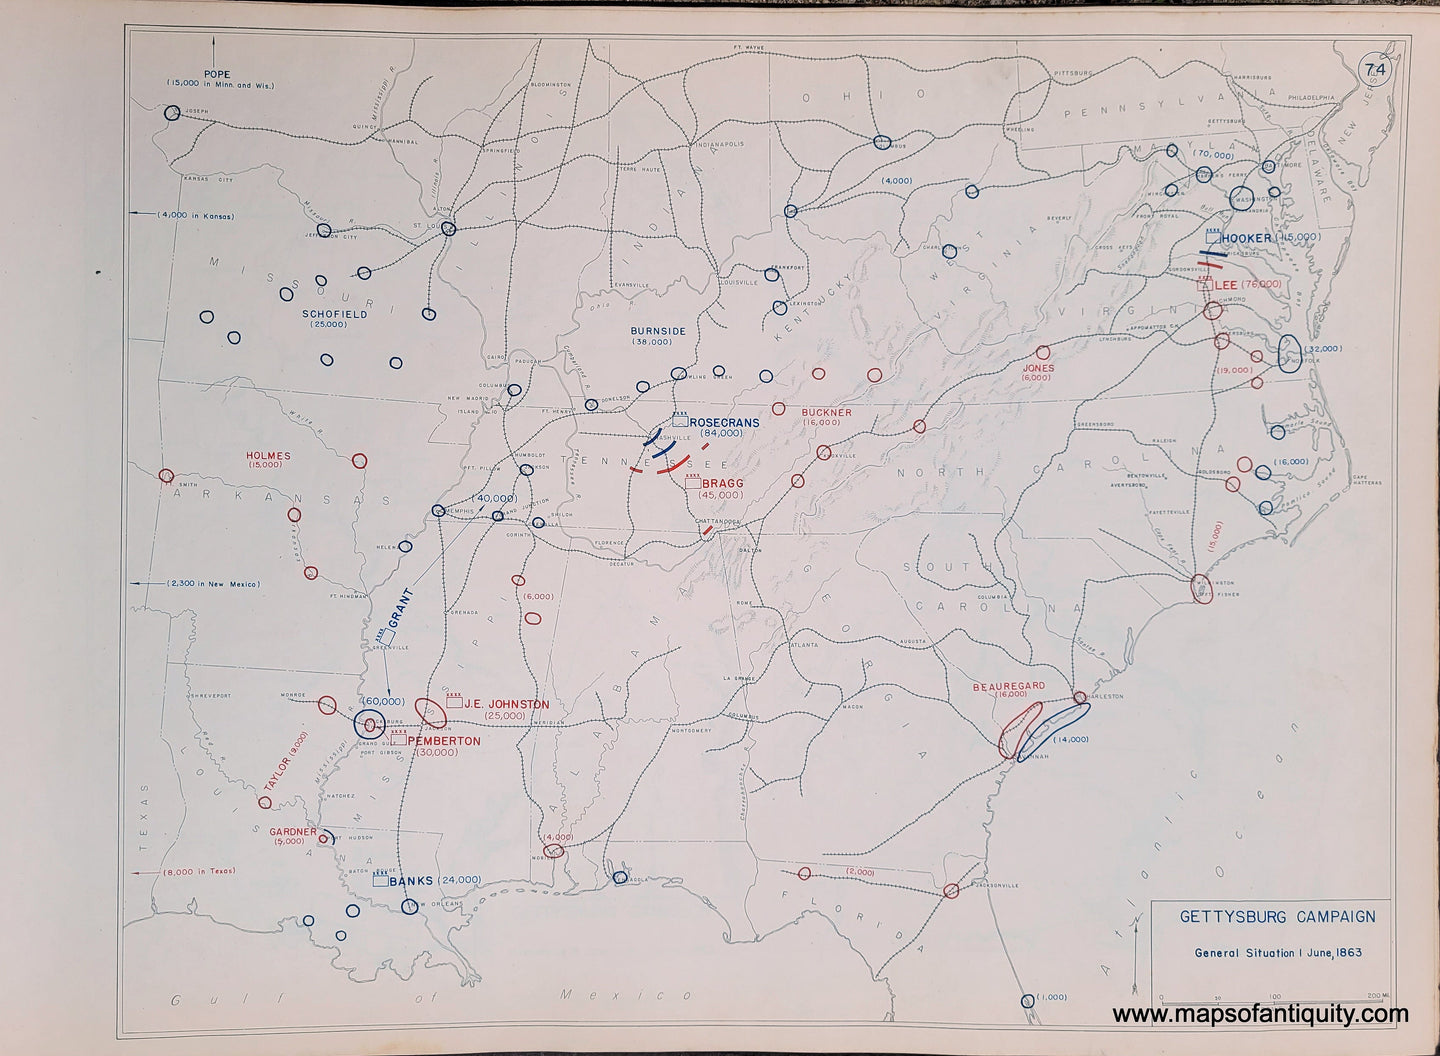 Genuine-Antique-Map-Gettysburg-Campaign-General-Situation-1-June-1863-1948-Matthew-Forney-Steele-Dept-of-Military-Art-and-Engineering-US-Military-Academy-West-Point-Maps-Of-Antiquity